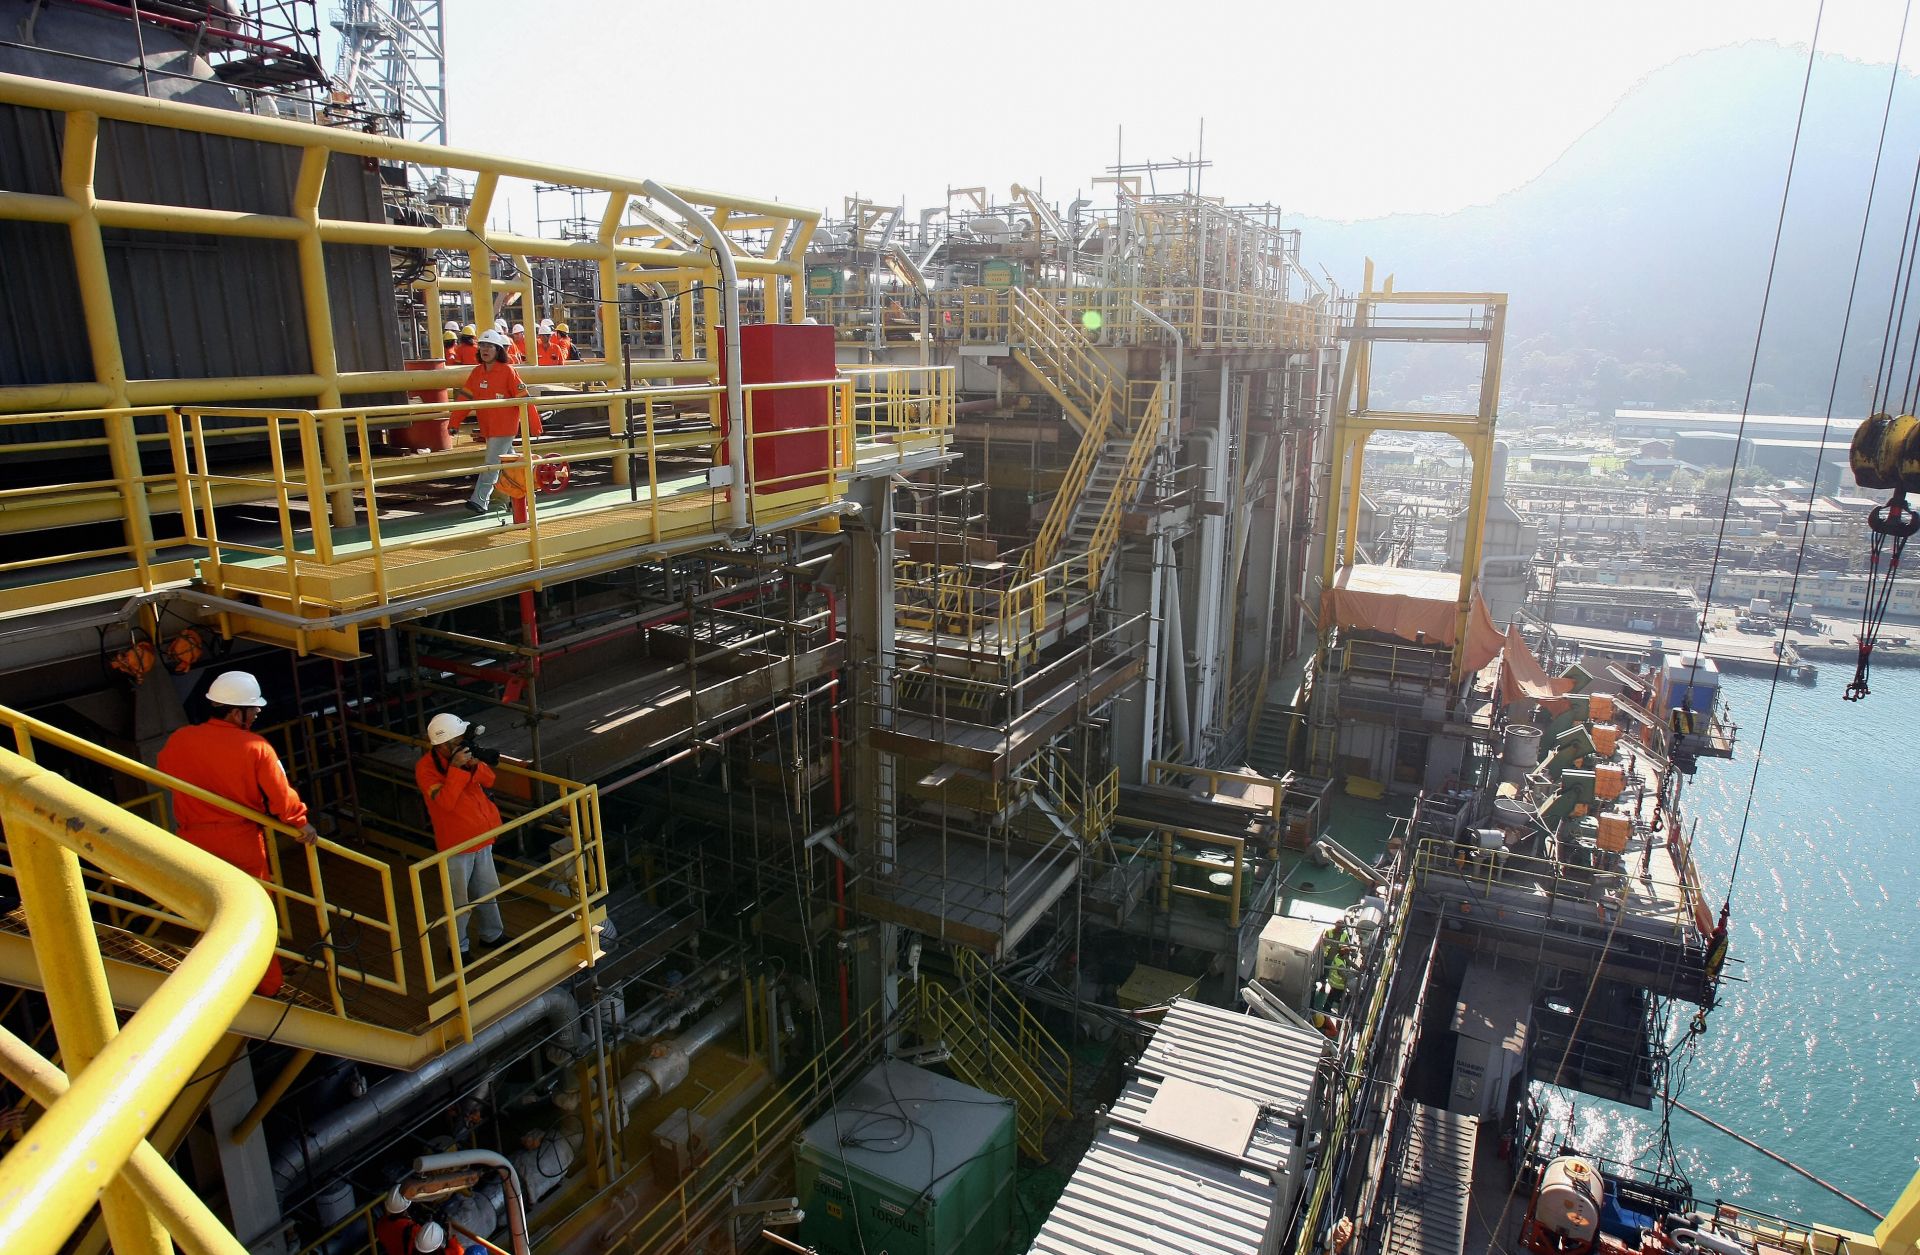 Brazil's P-51 semisubmersible offshore oil platform was built to produce up to 180,000 barrels of oil per day.